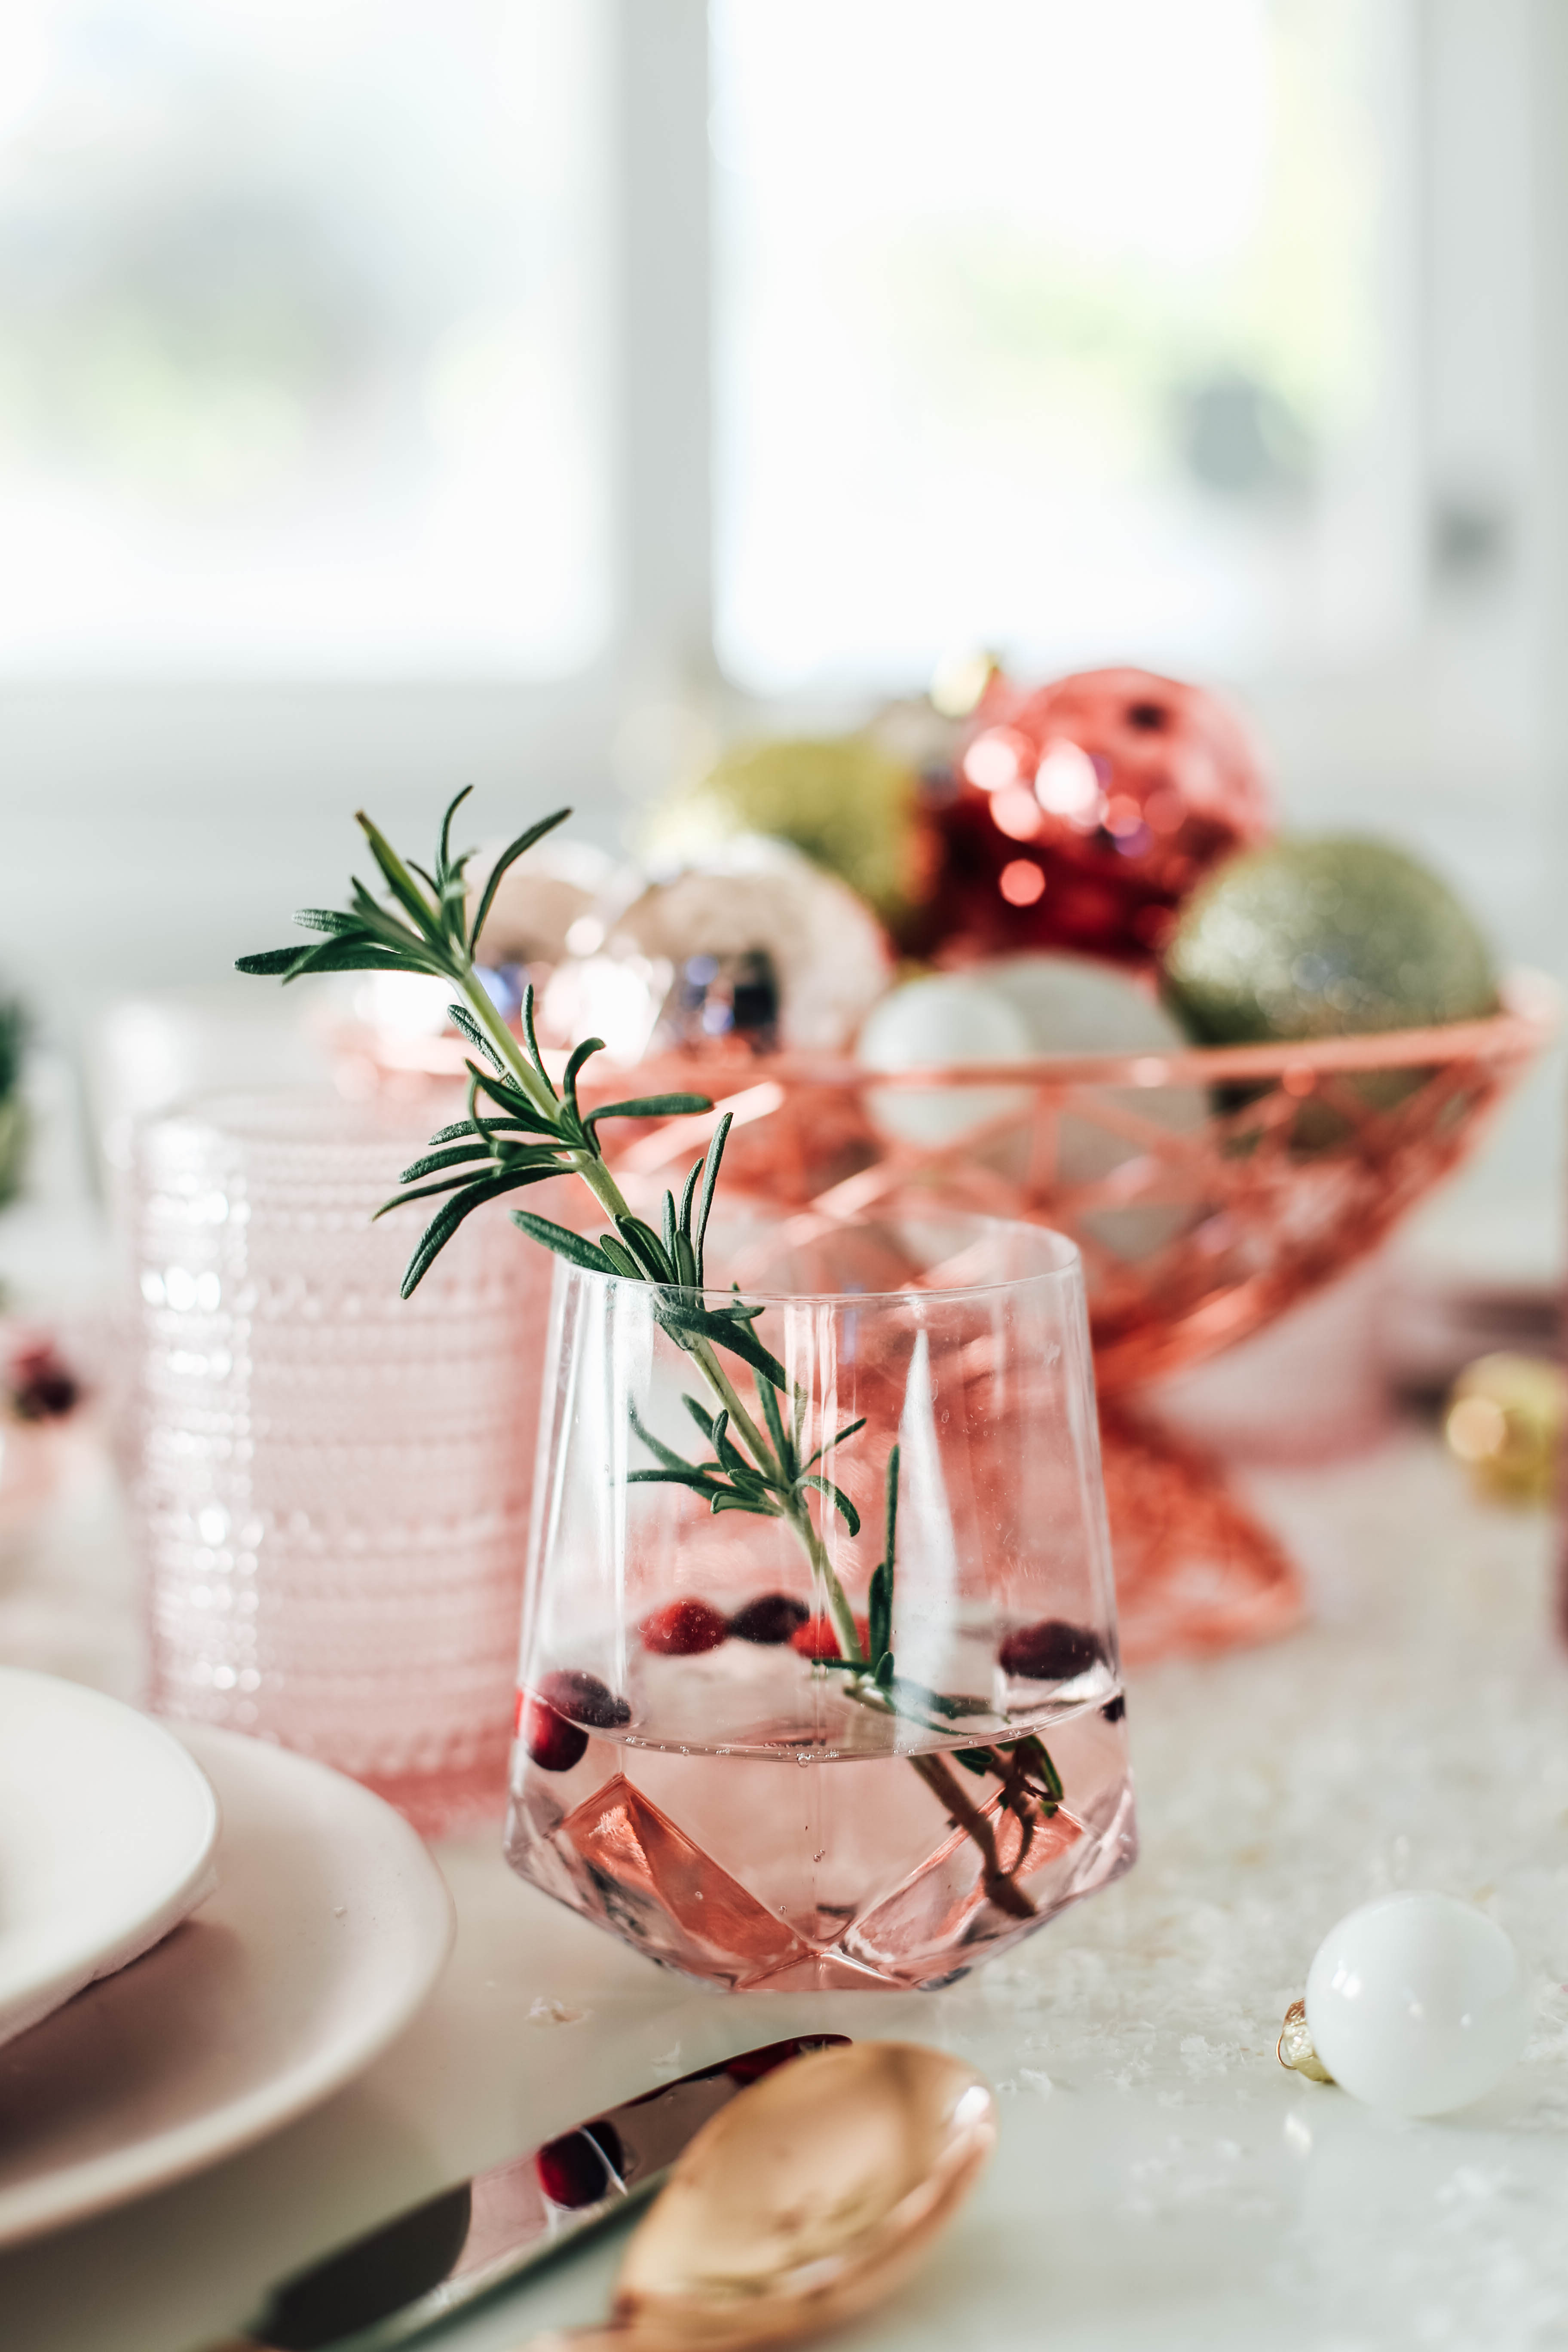 https://theinspiredhome.com/wp-content/uploads/2023/02/Millennial-Pink-Table-Setting-18.jpg